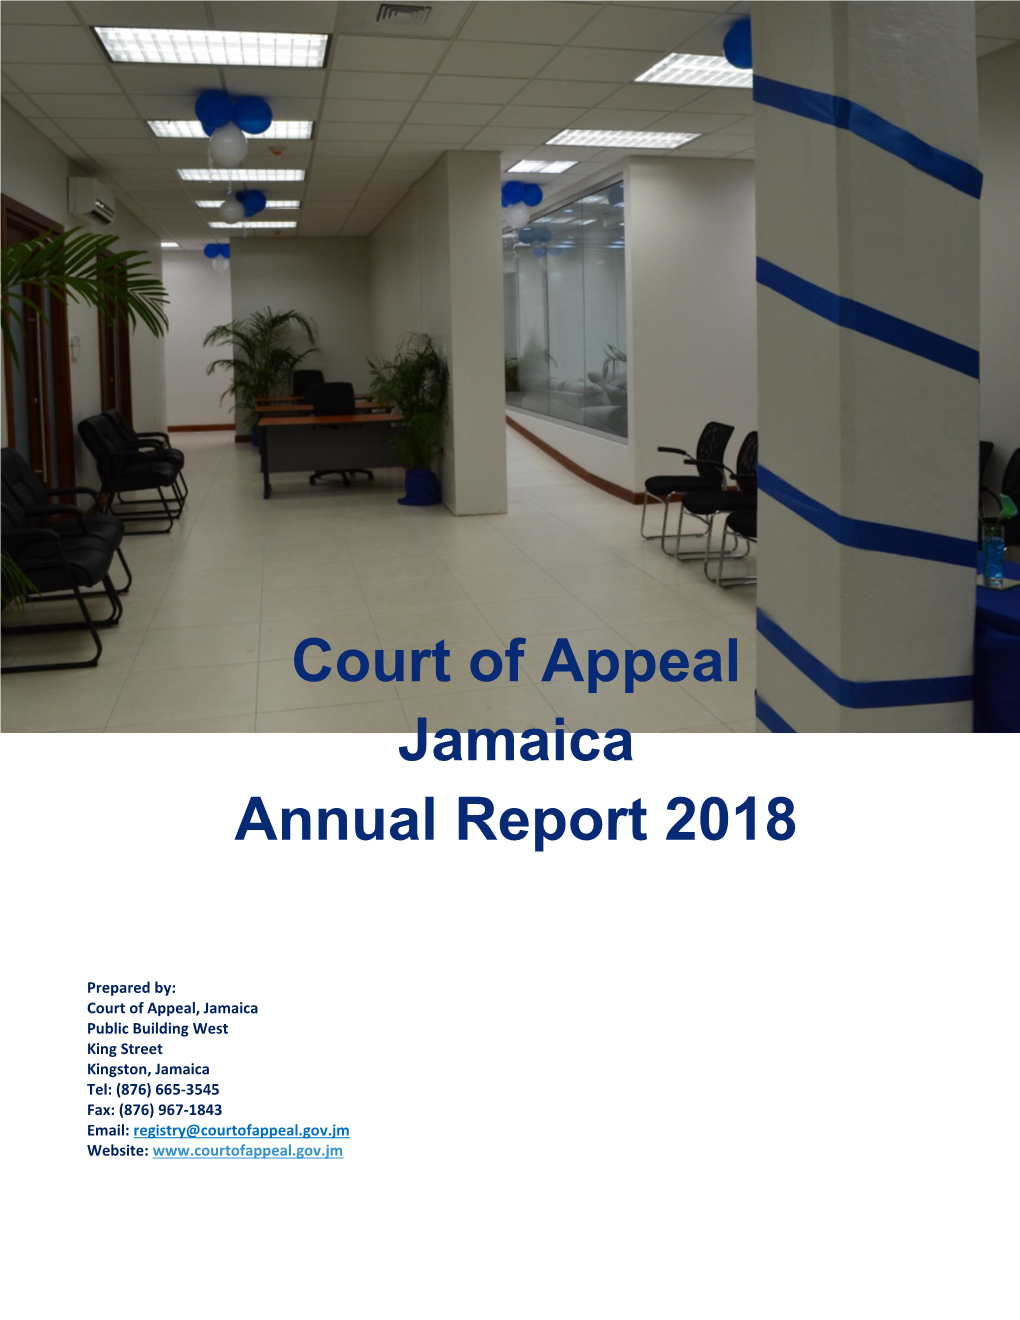 Court of Appeal Jamaica Annual Report 2018